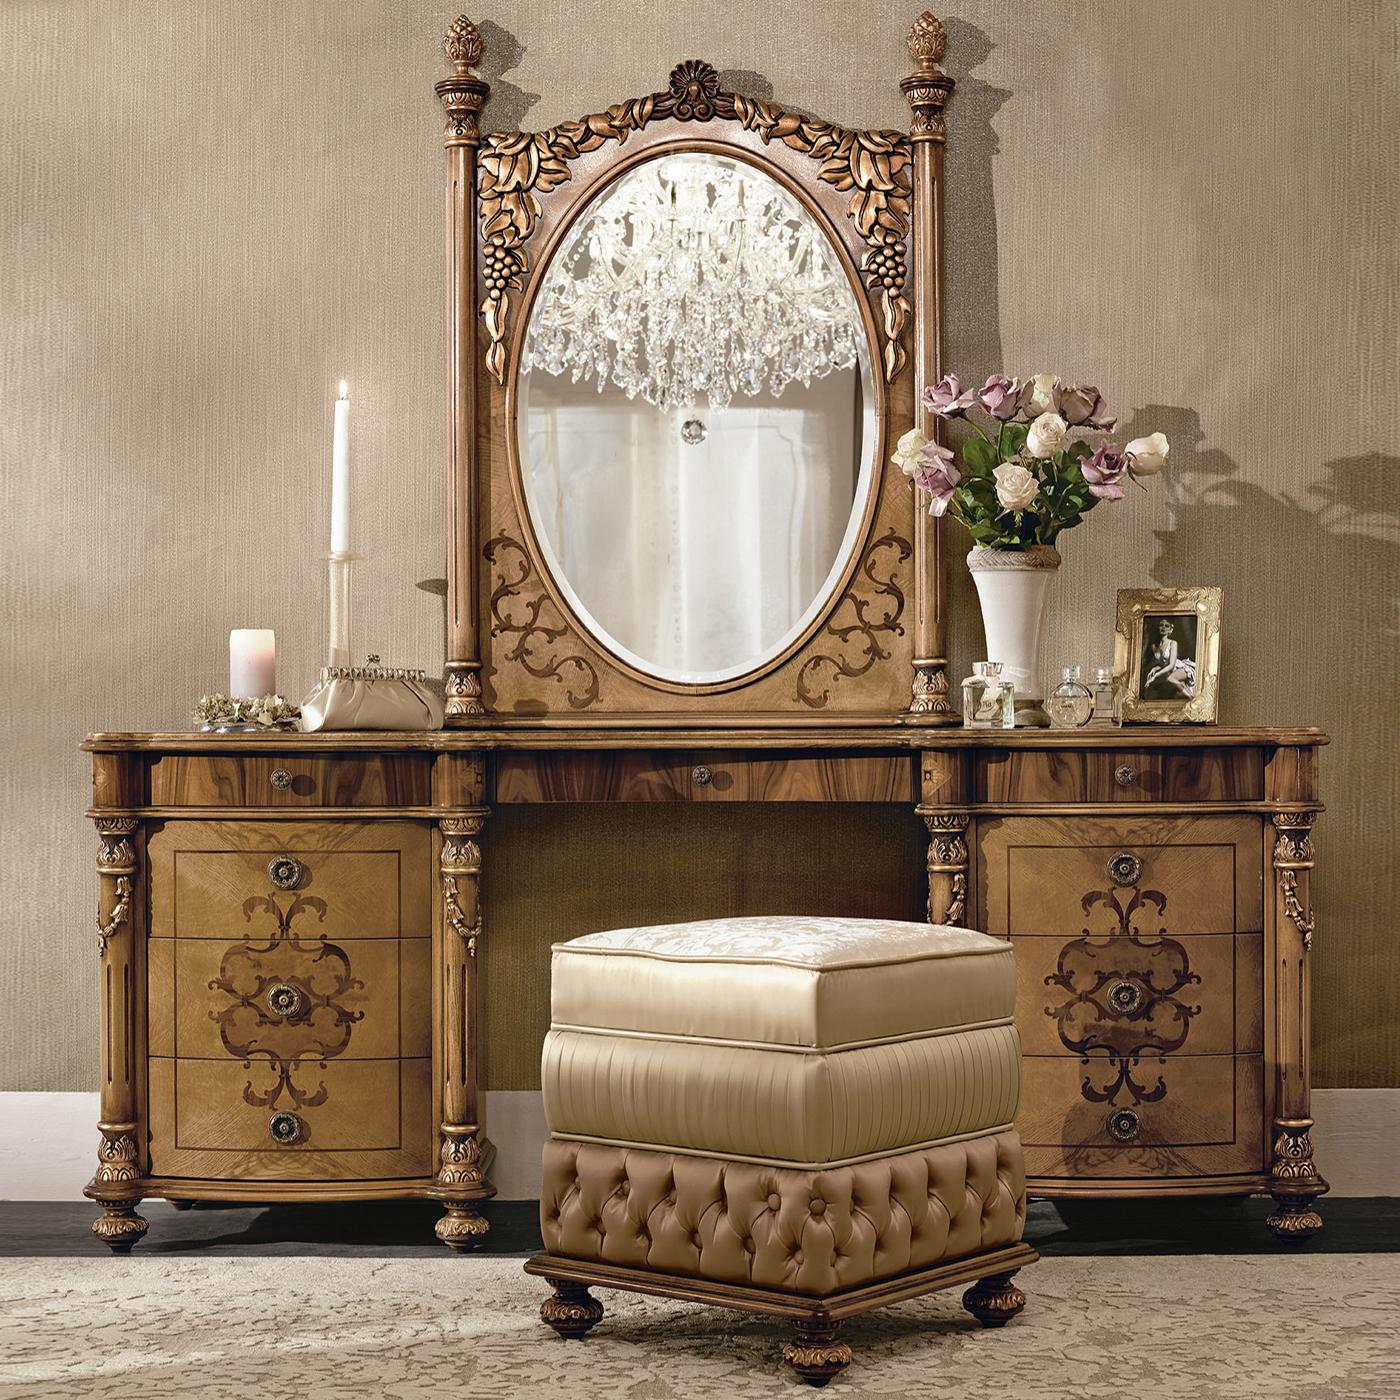 A triumph of fancy, precious decorations, and prized woods, this stunning oval wall mirror was designed to specifically complement the Bianchini's vanity desk. The oval mirror is set into a rectangular wooden frame veneered in a combination of